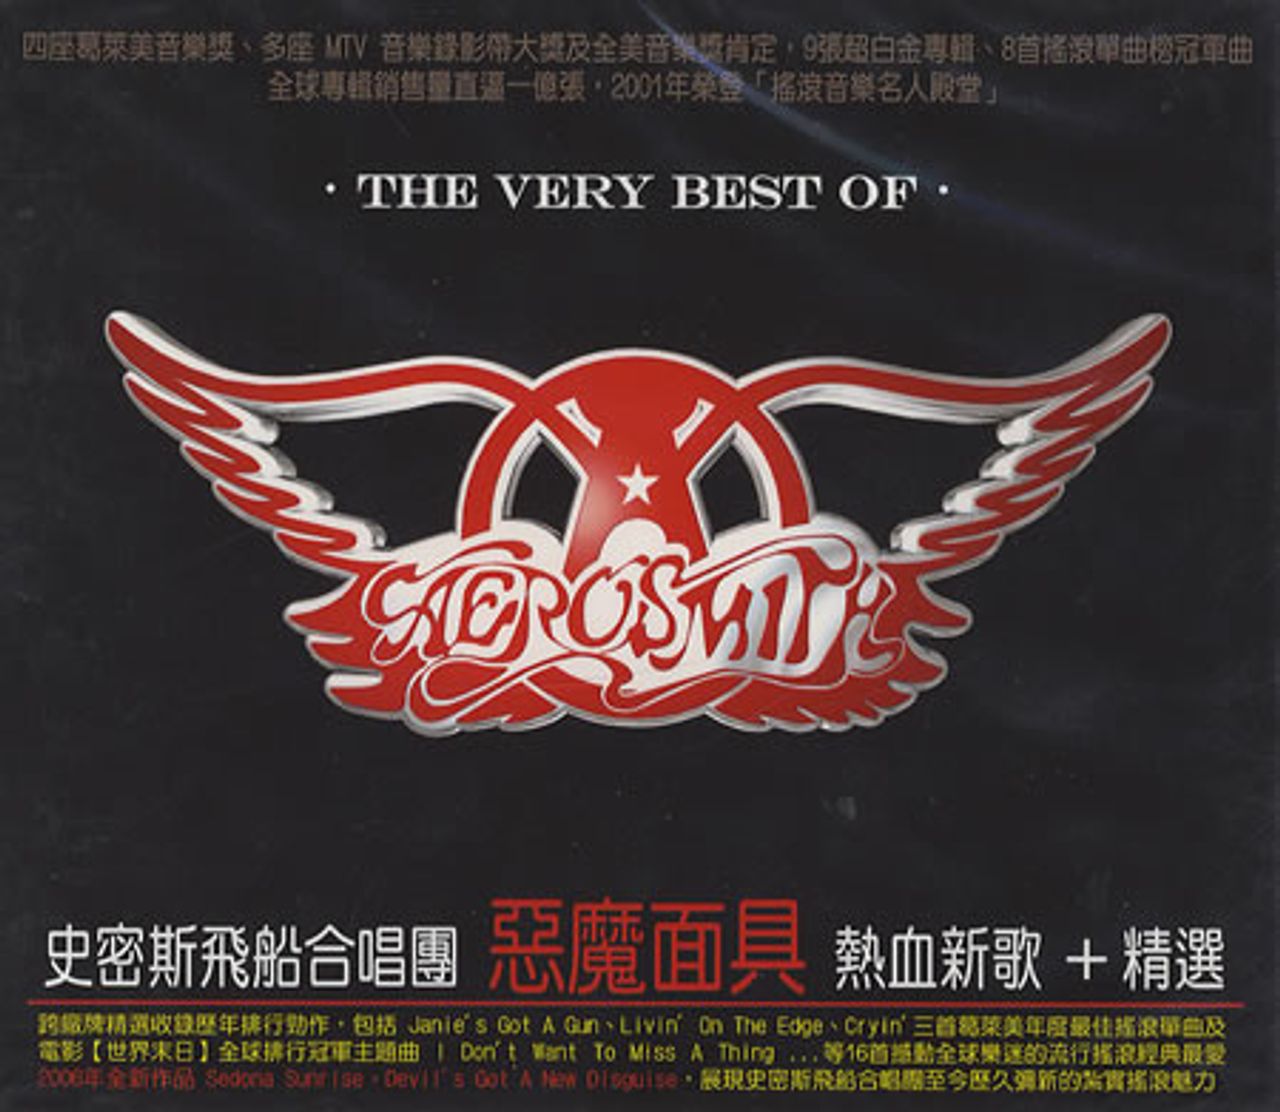 Aerosmith Devil's Got A New Disguise: The Very Best Of Taiwanese CD album